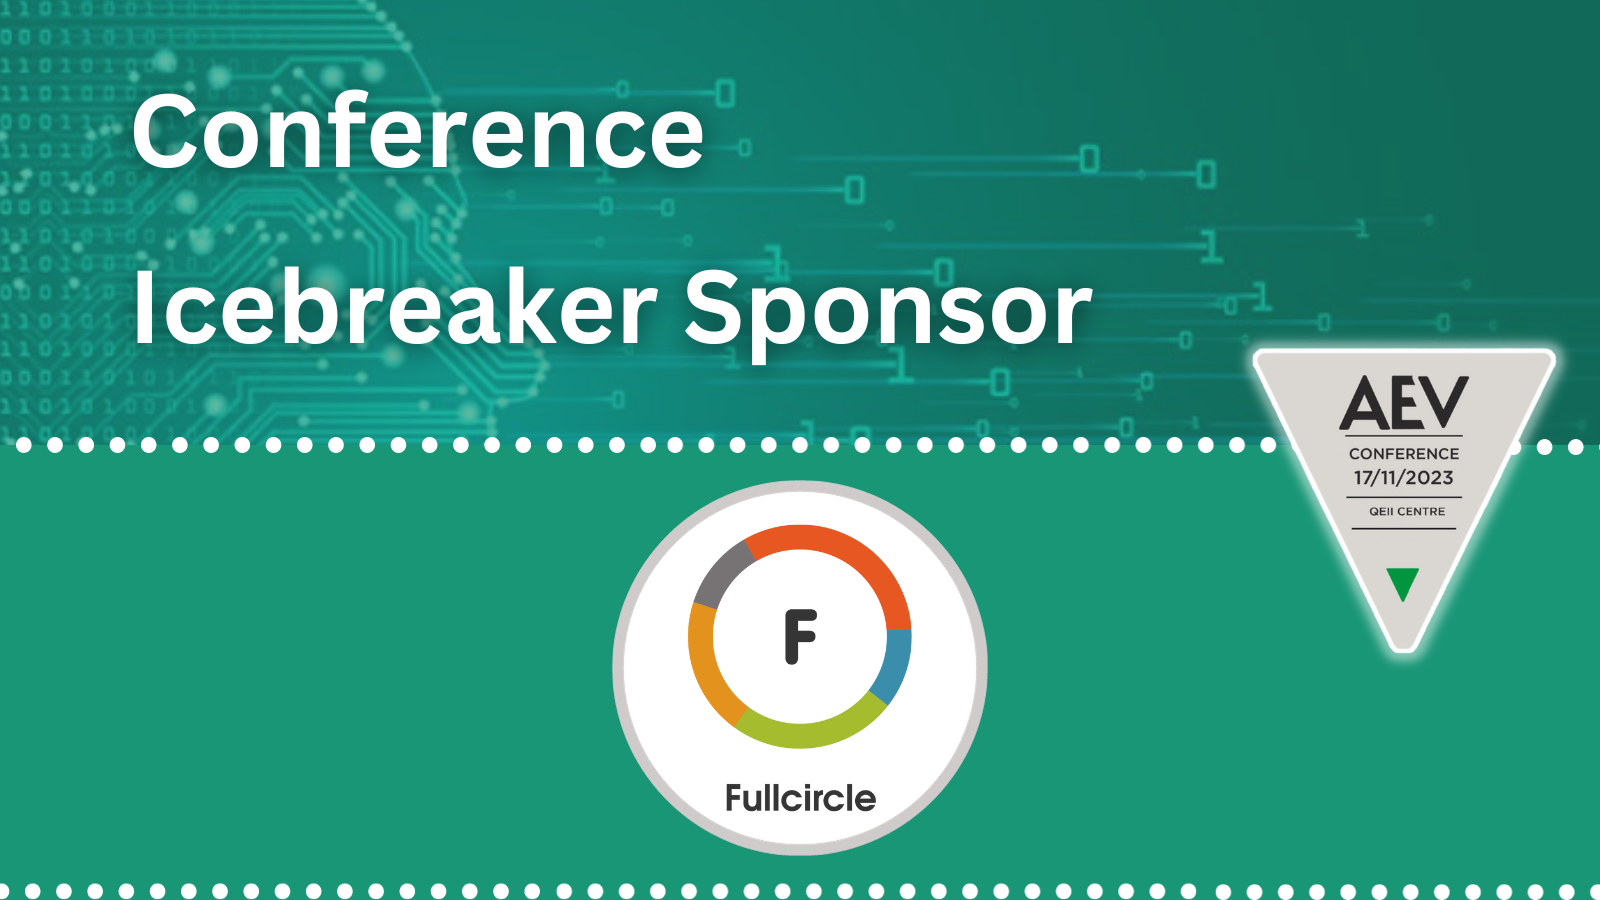 AEV names Full Circle Events & Exhibitions Ltd as conference icebreaker event sponsors